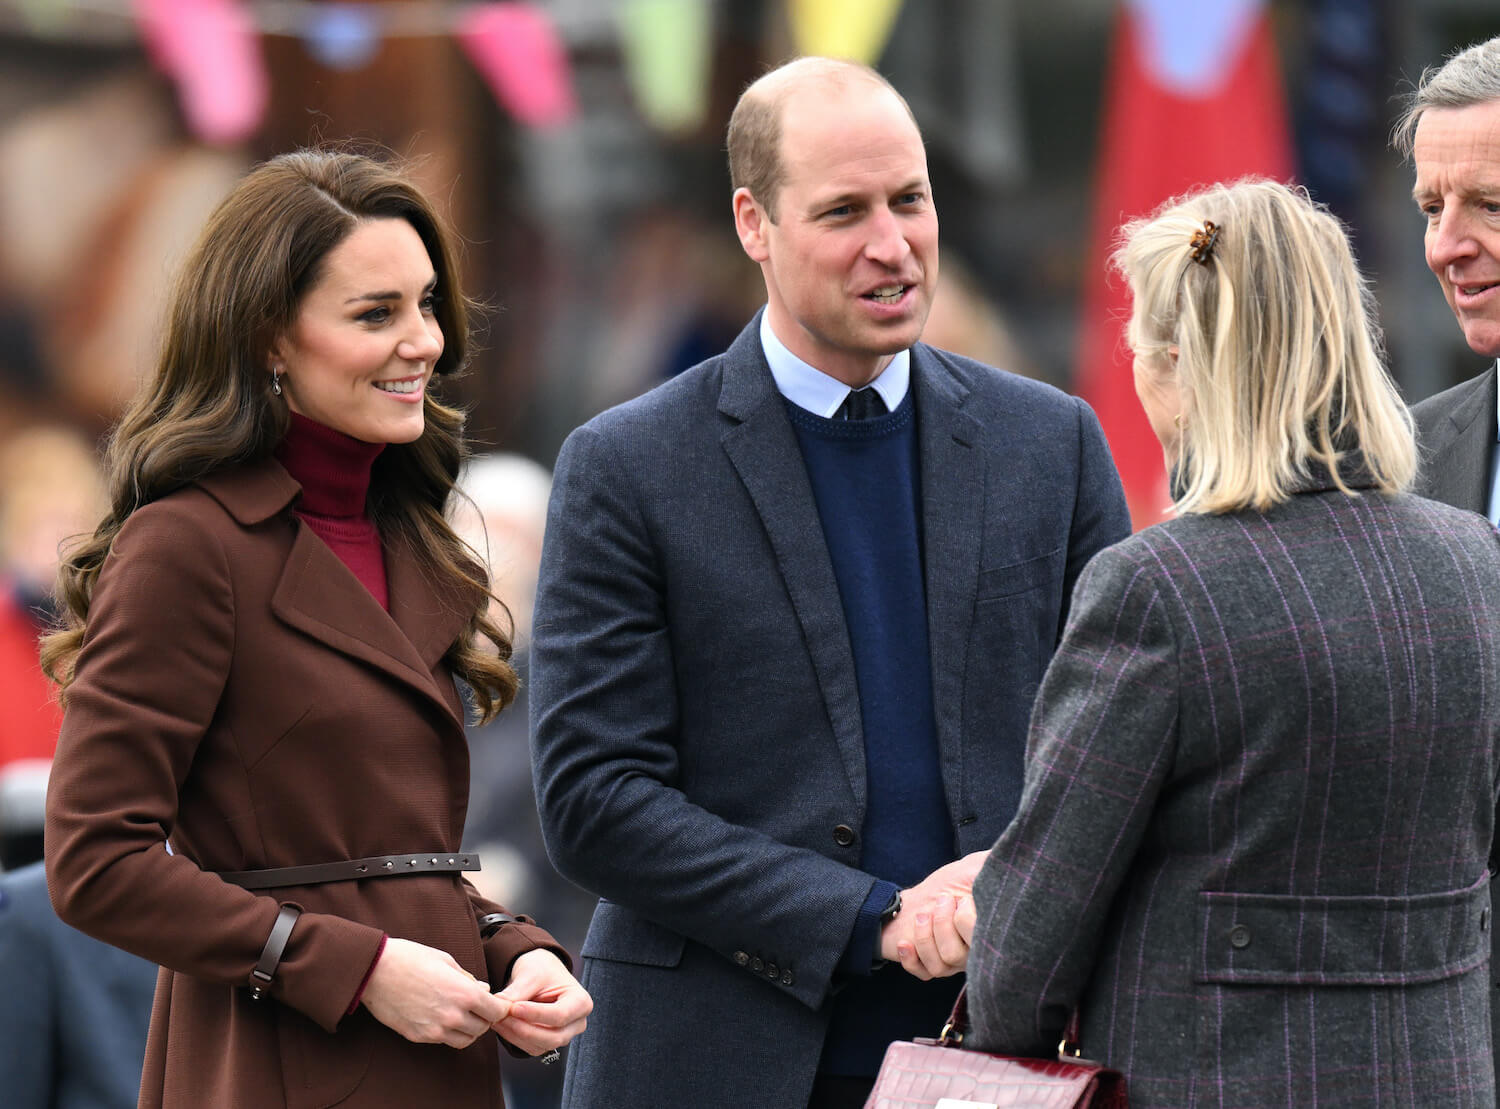 Kate Middleton shows she is similar to Princess Diana when speaking with people, seen here with Prince William